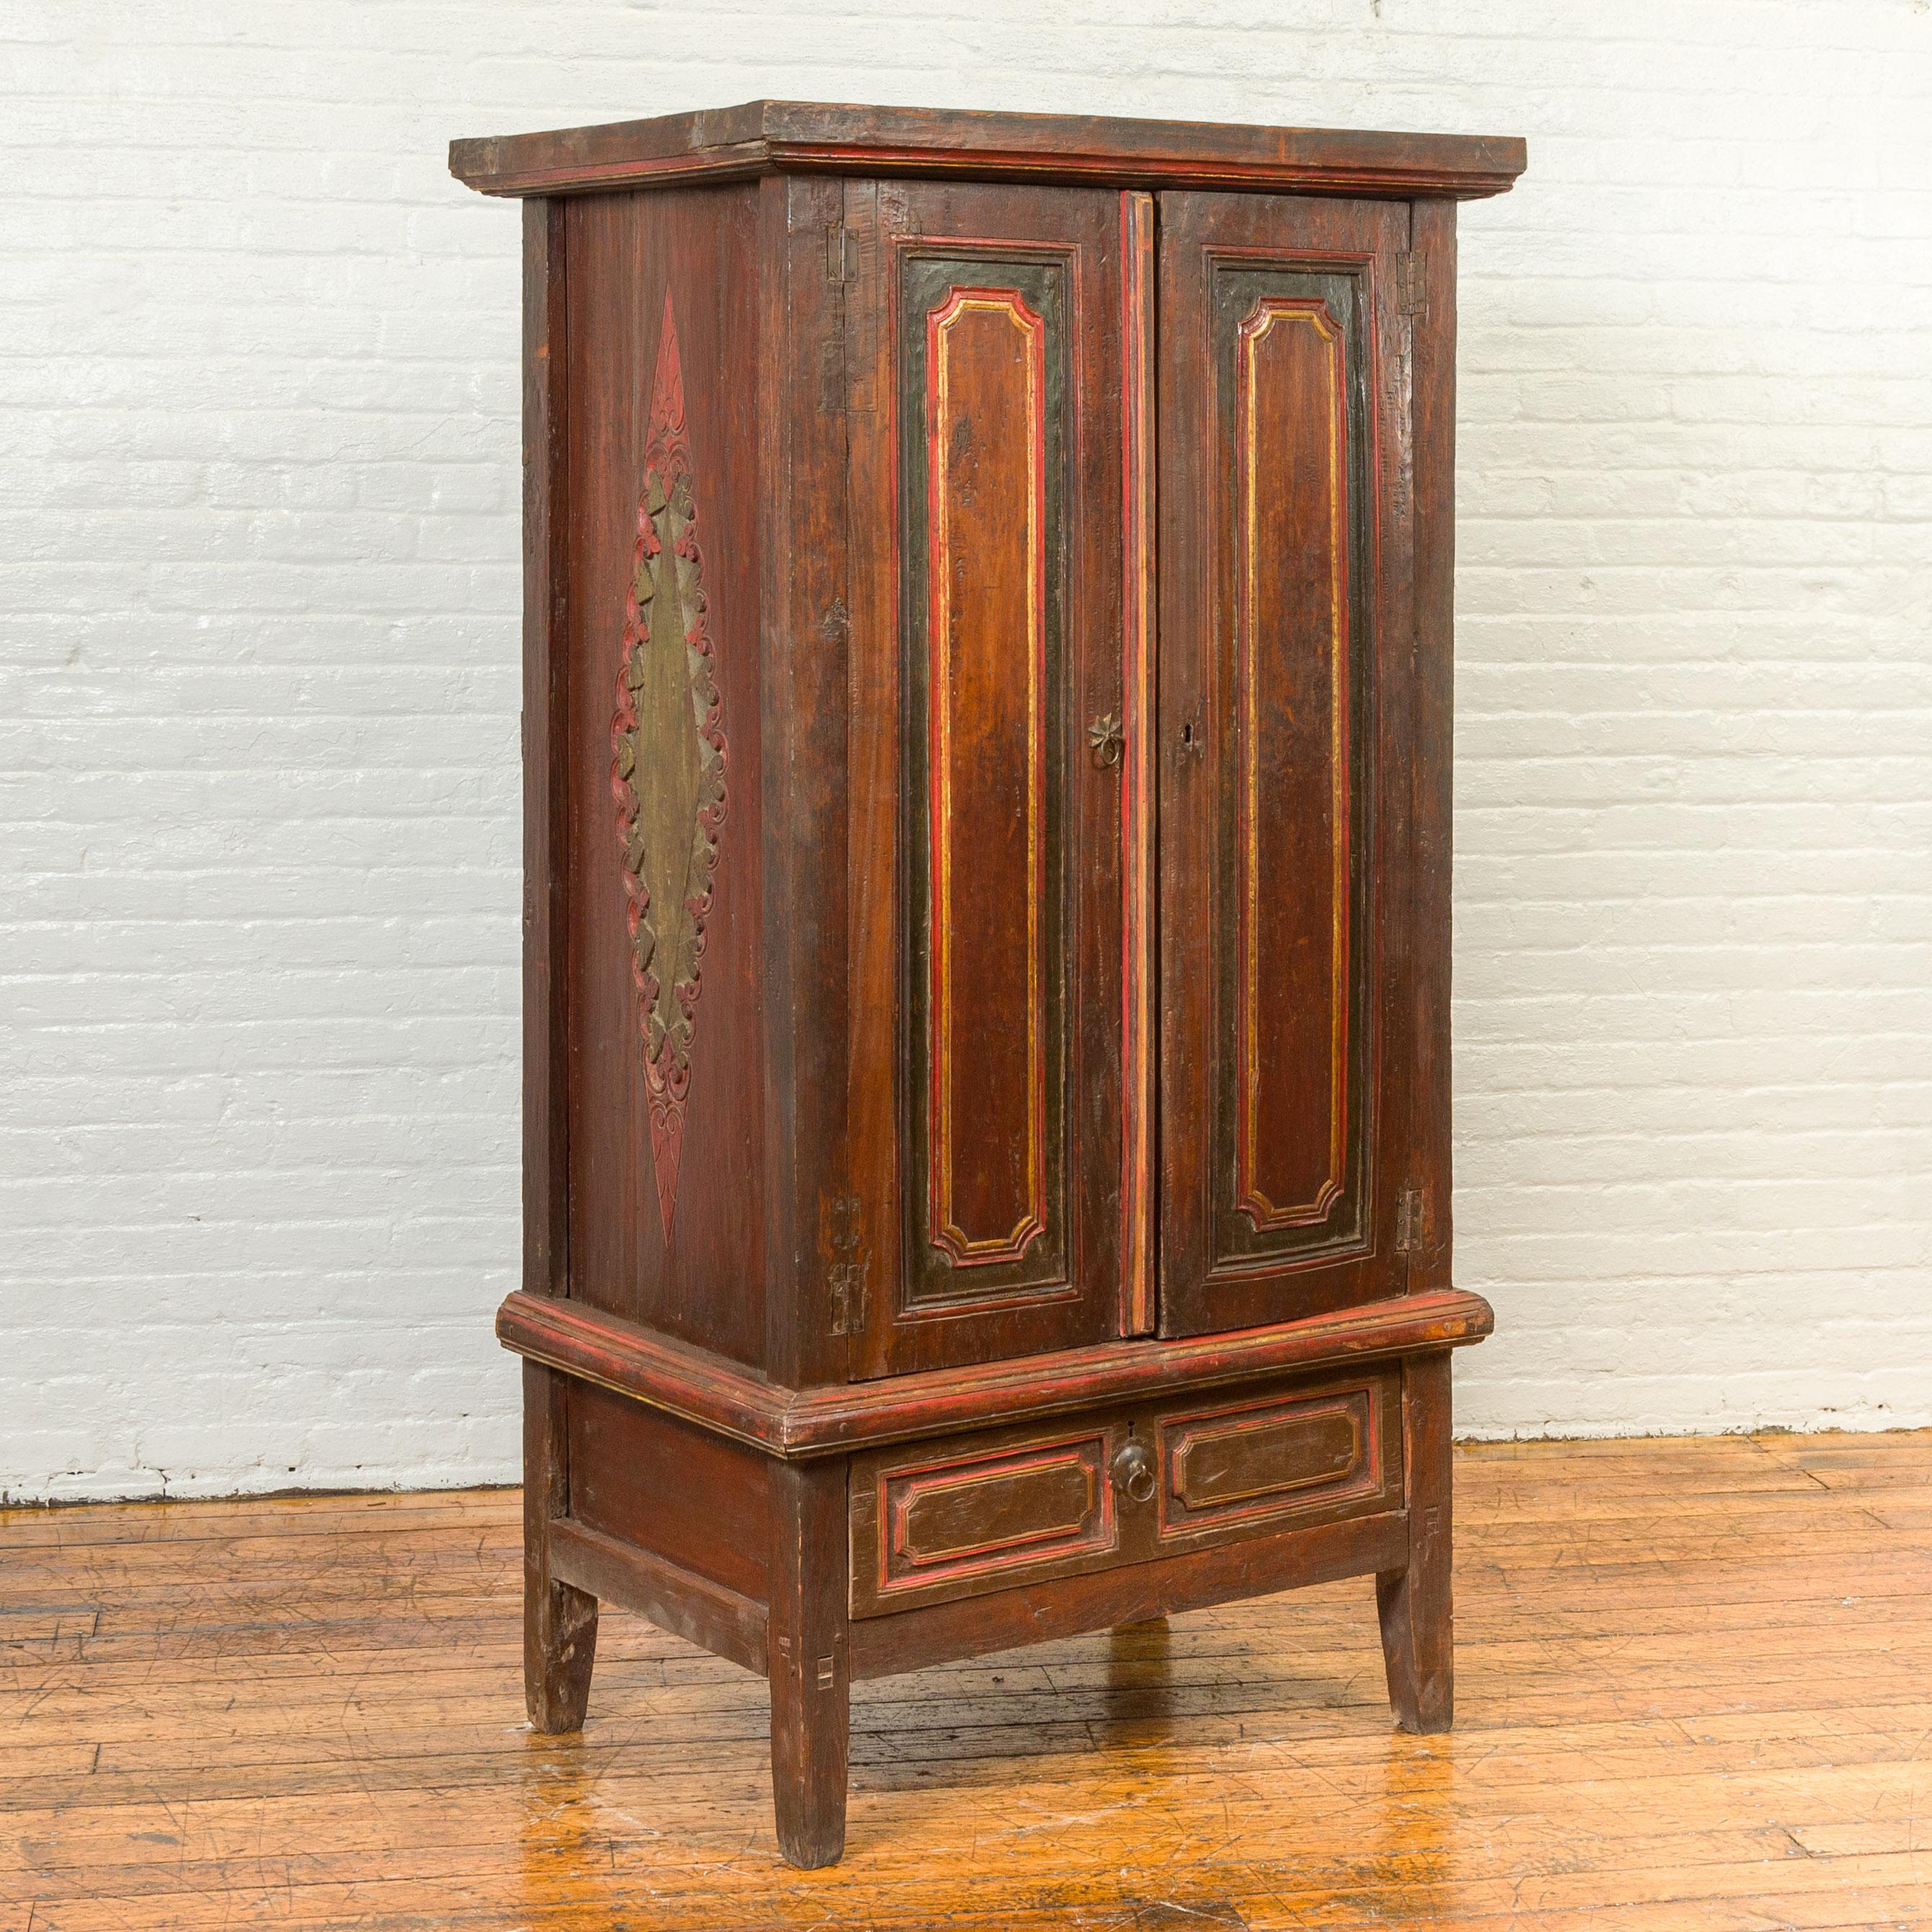 A Dutch colonial wooden cabinet from the 19th century, with polychrome finish, single drawer and carved sides. Created in Indonesia during the 19th century, this tall cabinet features a cornice overhanging two large doors, each adorned with a green,